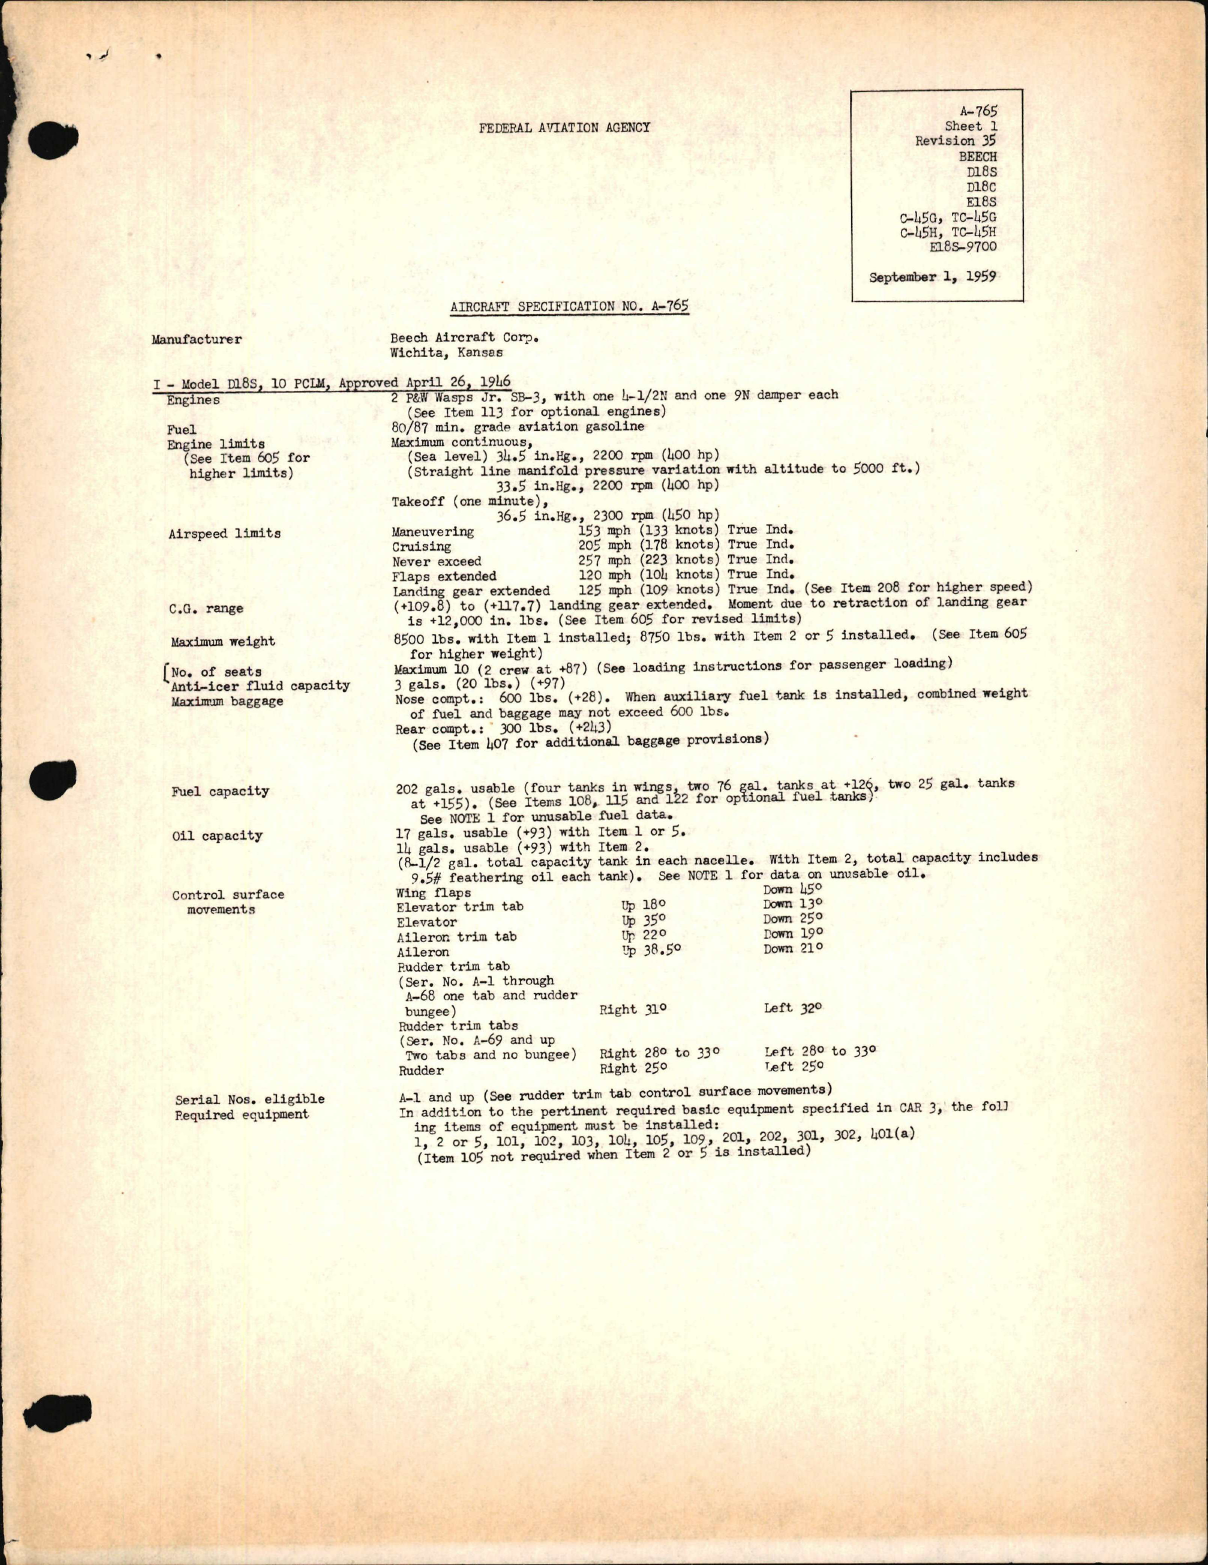 Sample page 1 from AirCorps Library document: D18S, D18C, E18S, C-45G, C-45H, TC-45G, TC-45H, and E18S-9700